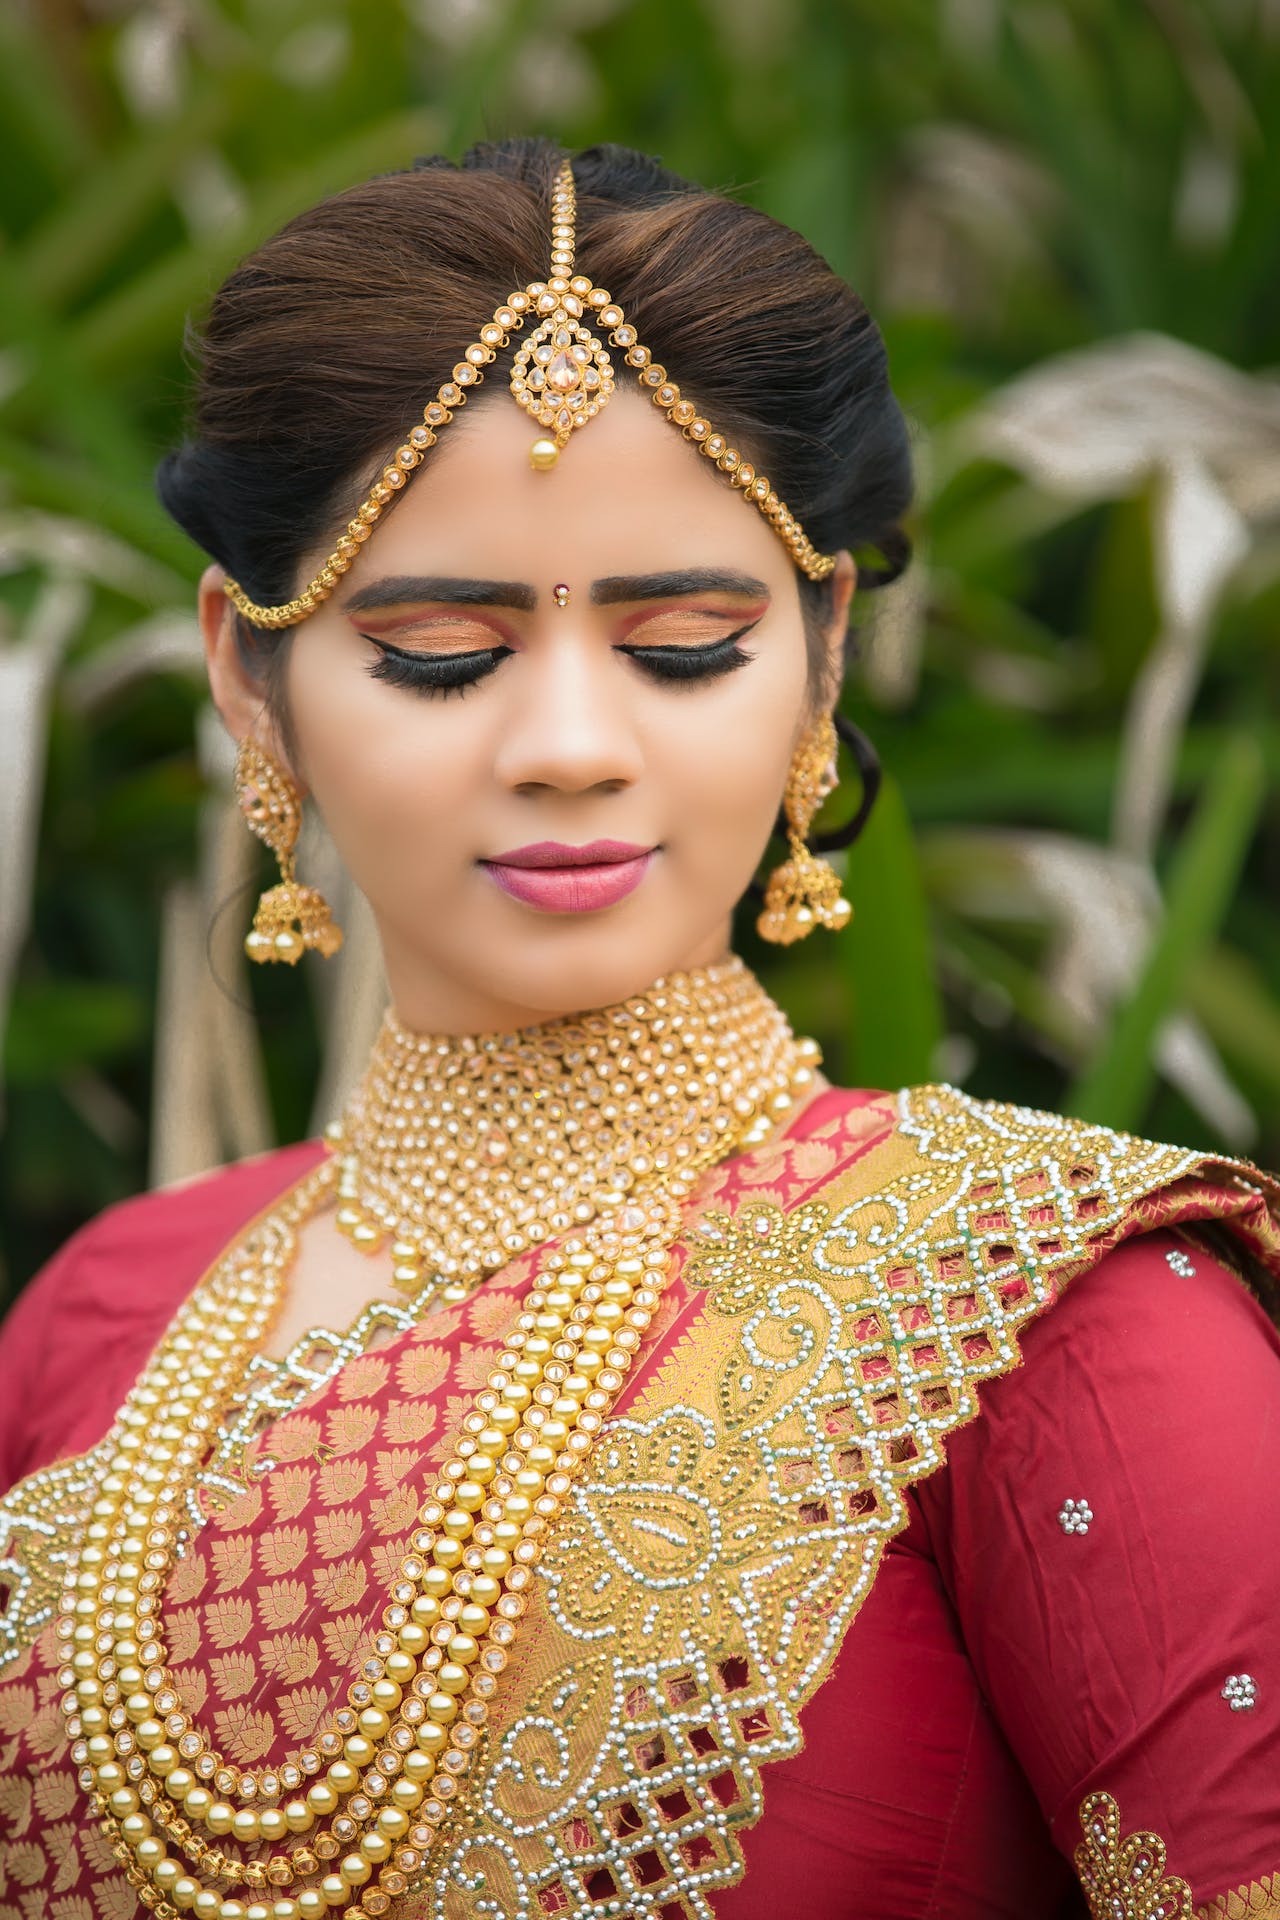 An Indian woman wearing gold jewelry.